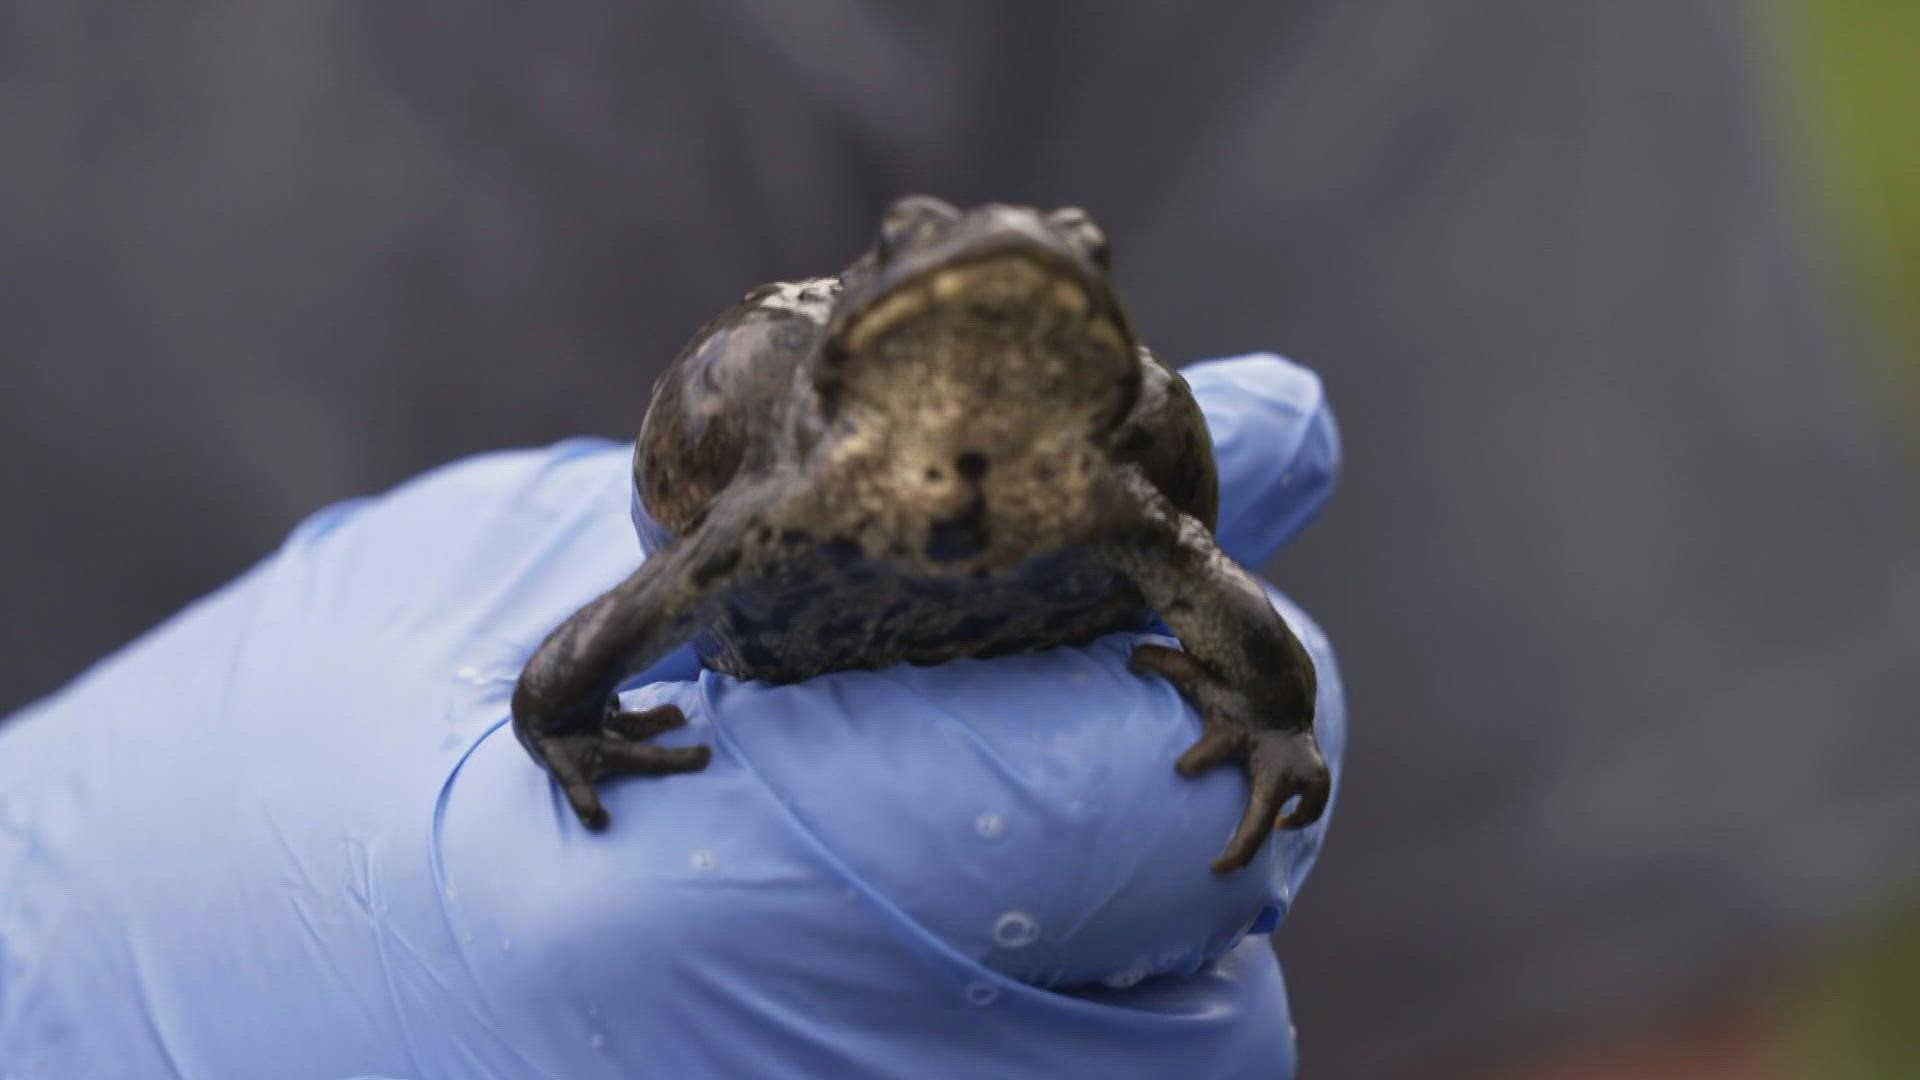 There might be only 800 adult boreal toads left in the state due to a deadly fungus, according to wildlife officials.